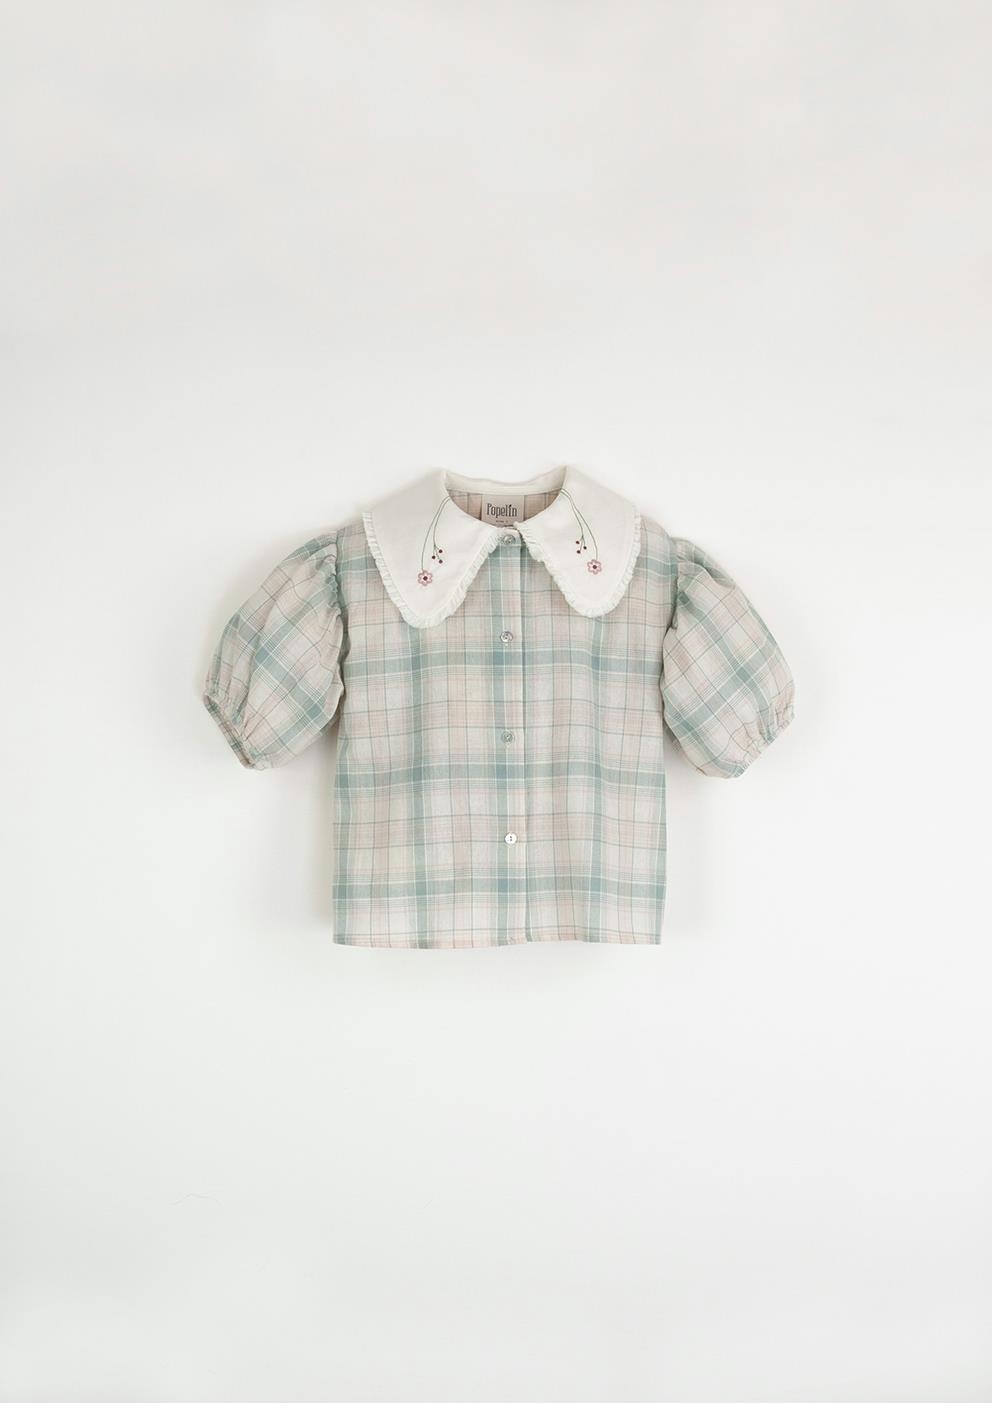 Mod.21.4 Pink plaid organic blouse with embroidered collar | SS23 Mod.21.4 Pink plaid organic blouse with embroidered collar